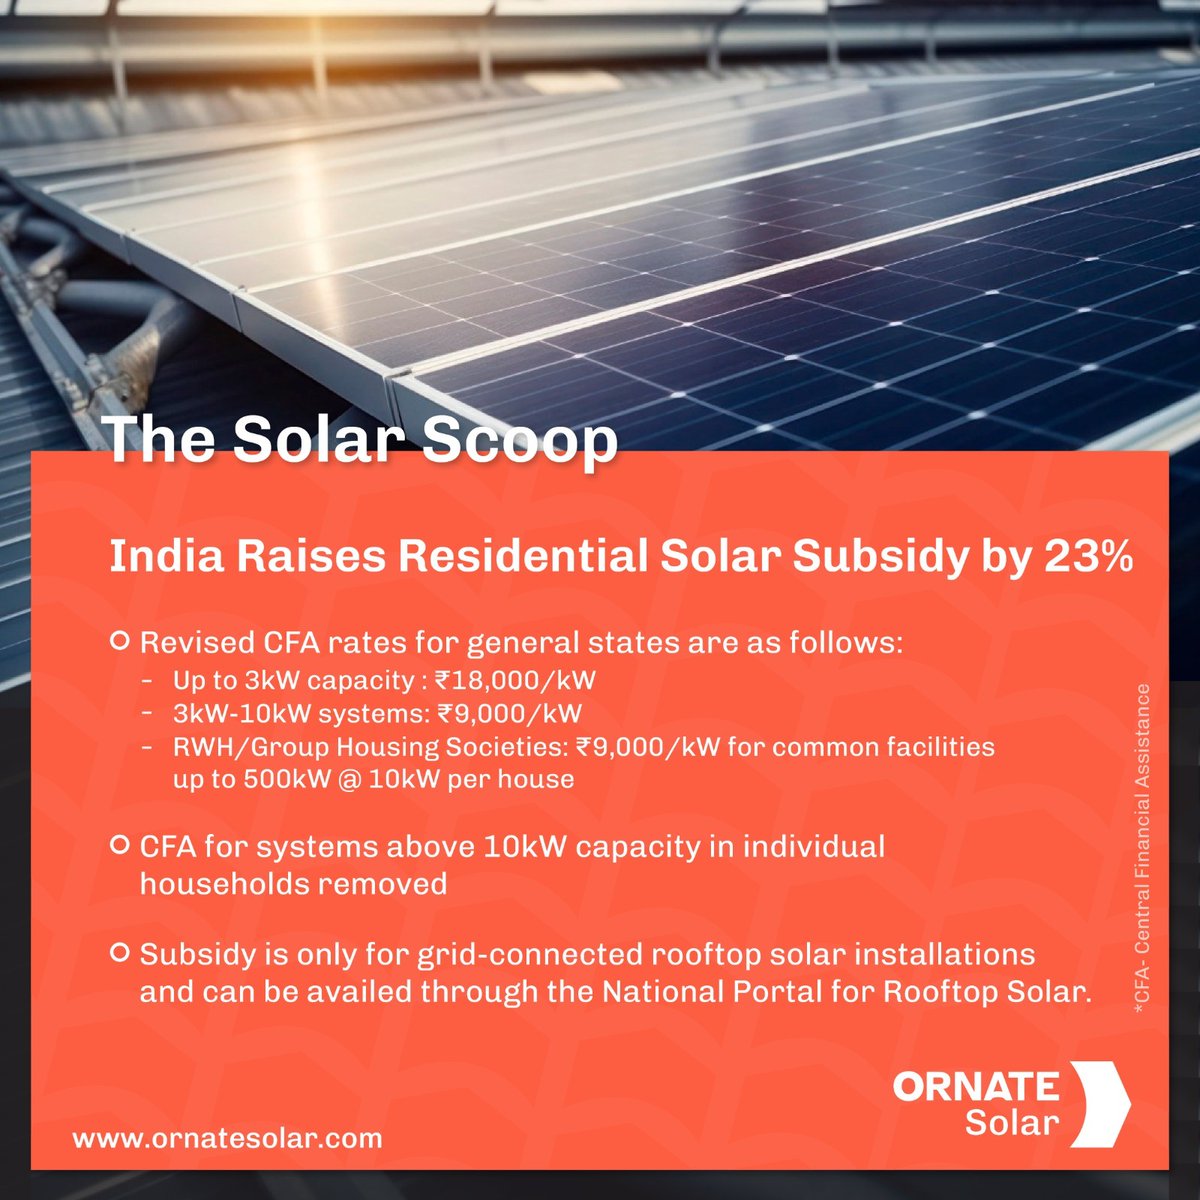 The Indian government has raised the #solarsubsidy for residential rooftop solar installations across India! The move is expected to significantly boost the adoption of this clean energy resource in the next few months. 

Get the full scoop here👇🏽

#OrnateSolar #Solarscoop